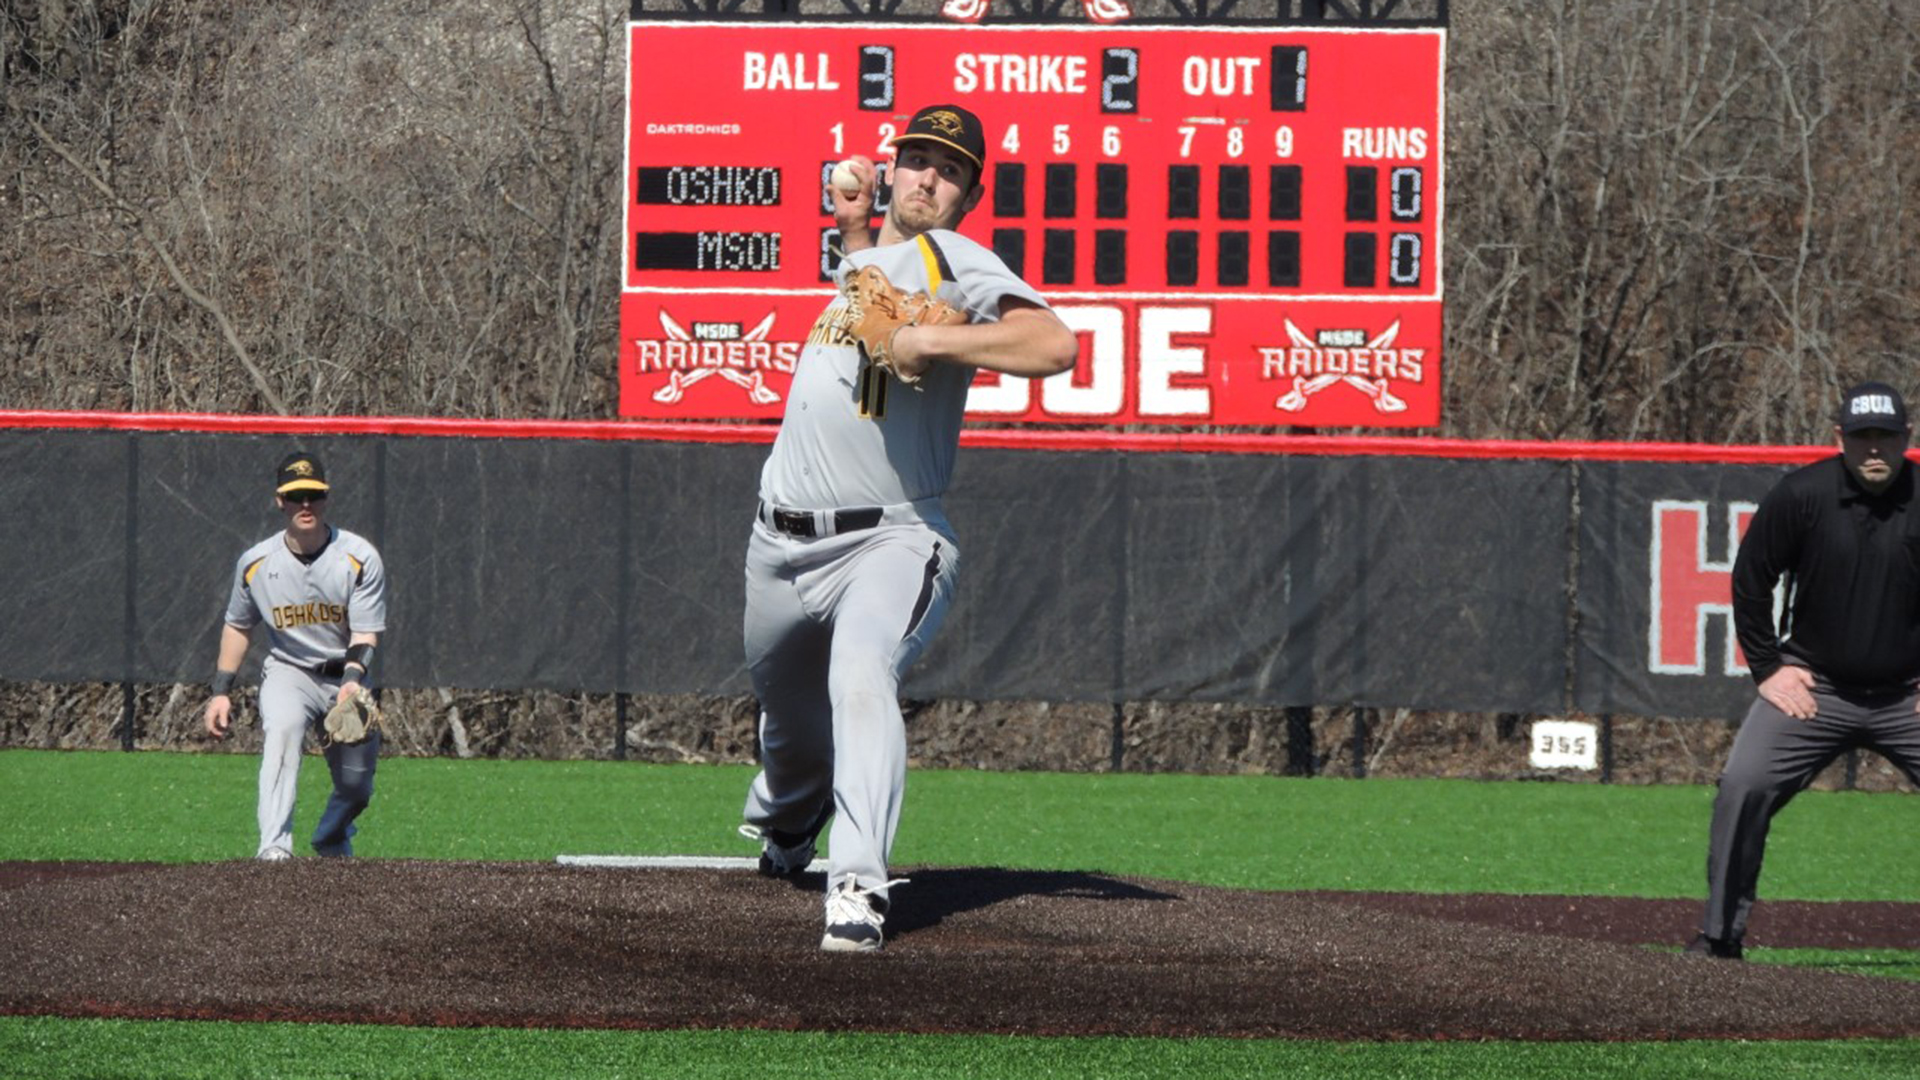 Harry Orth pitched the first five innings of game one against the Raiders, yielding one hit with eight strikeouts.